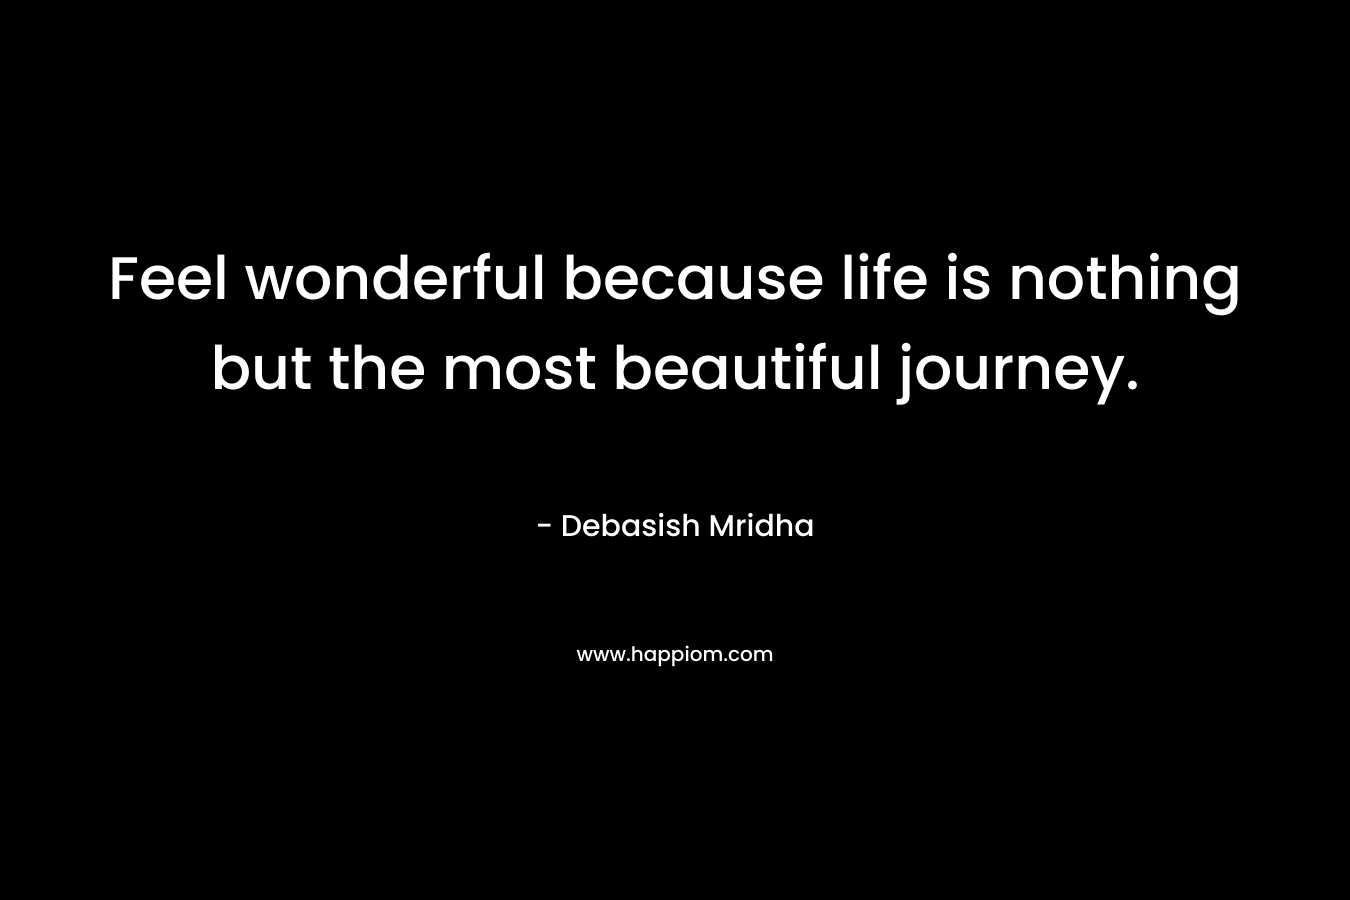 Feel wonderful because life is nothing but the most beautiful journey.